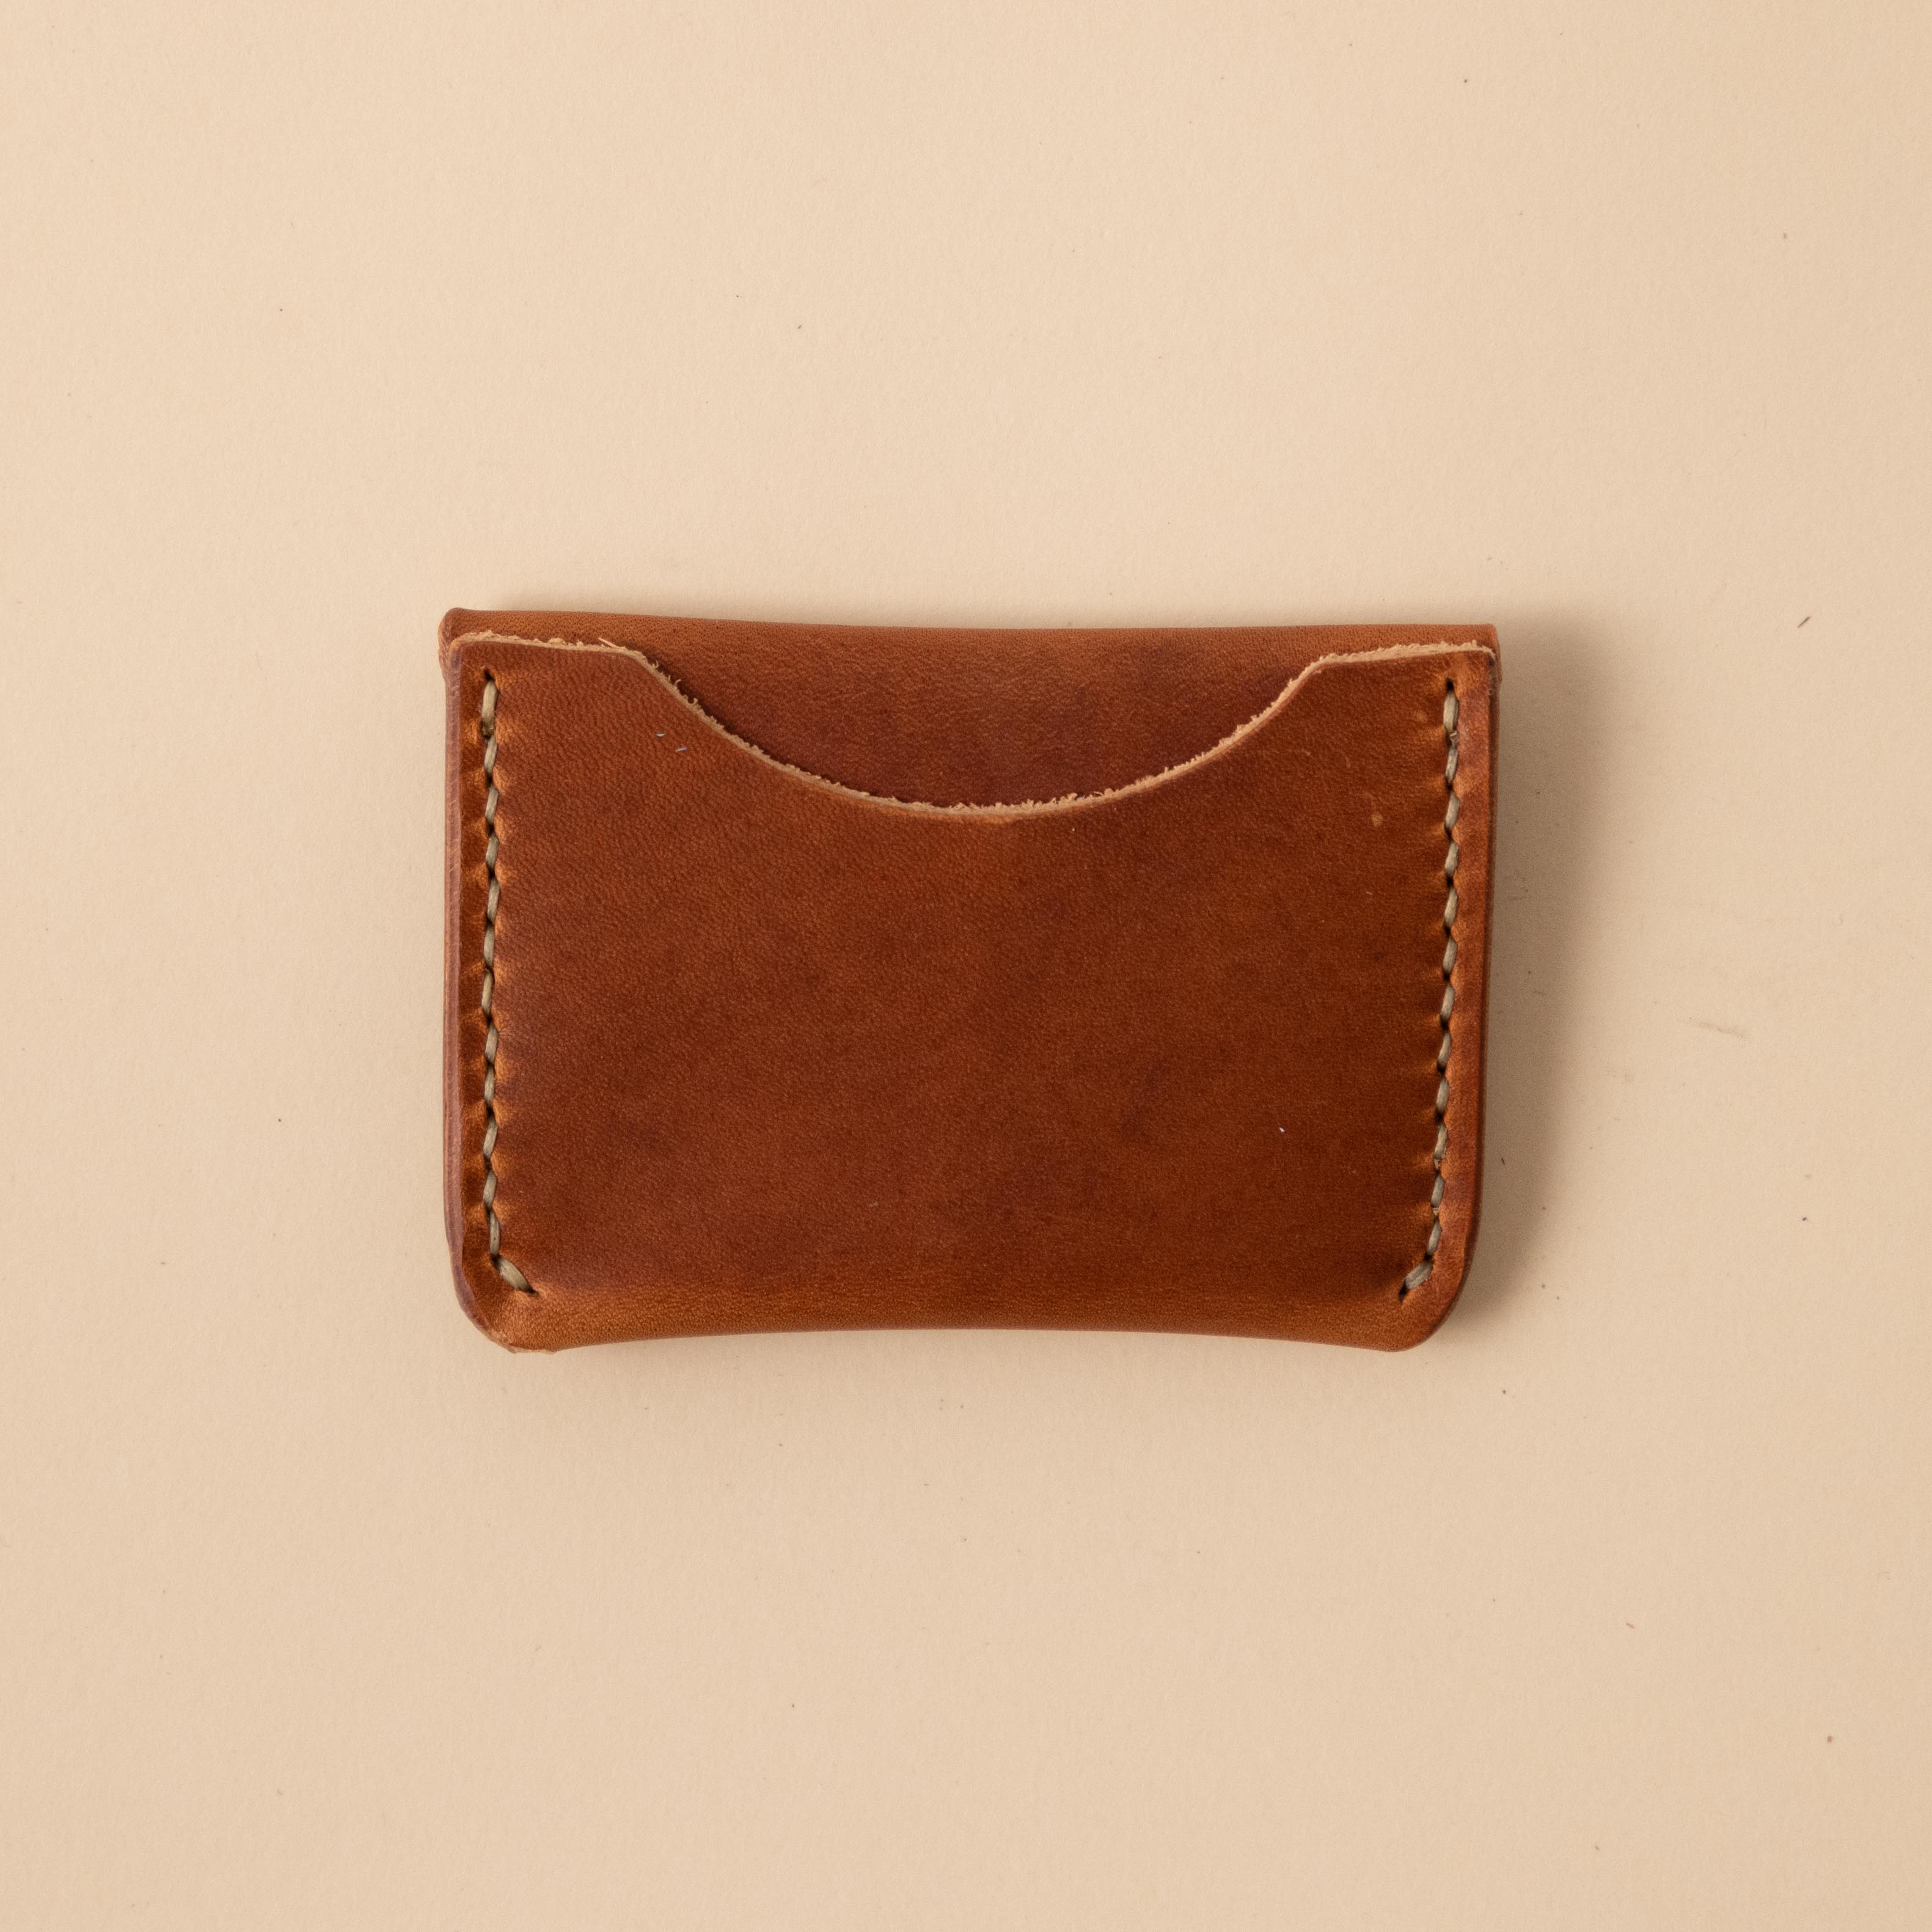 Leather Valet Trays  Leather Home Goods made in the USA by KMM & Co.